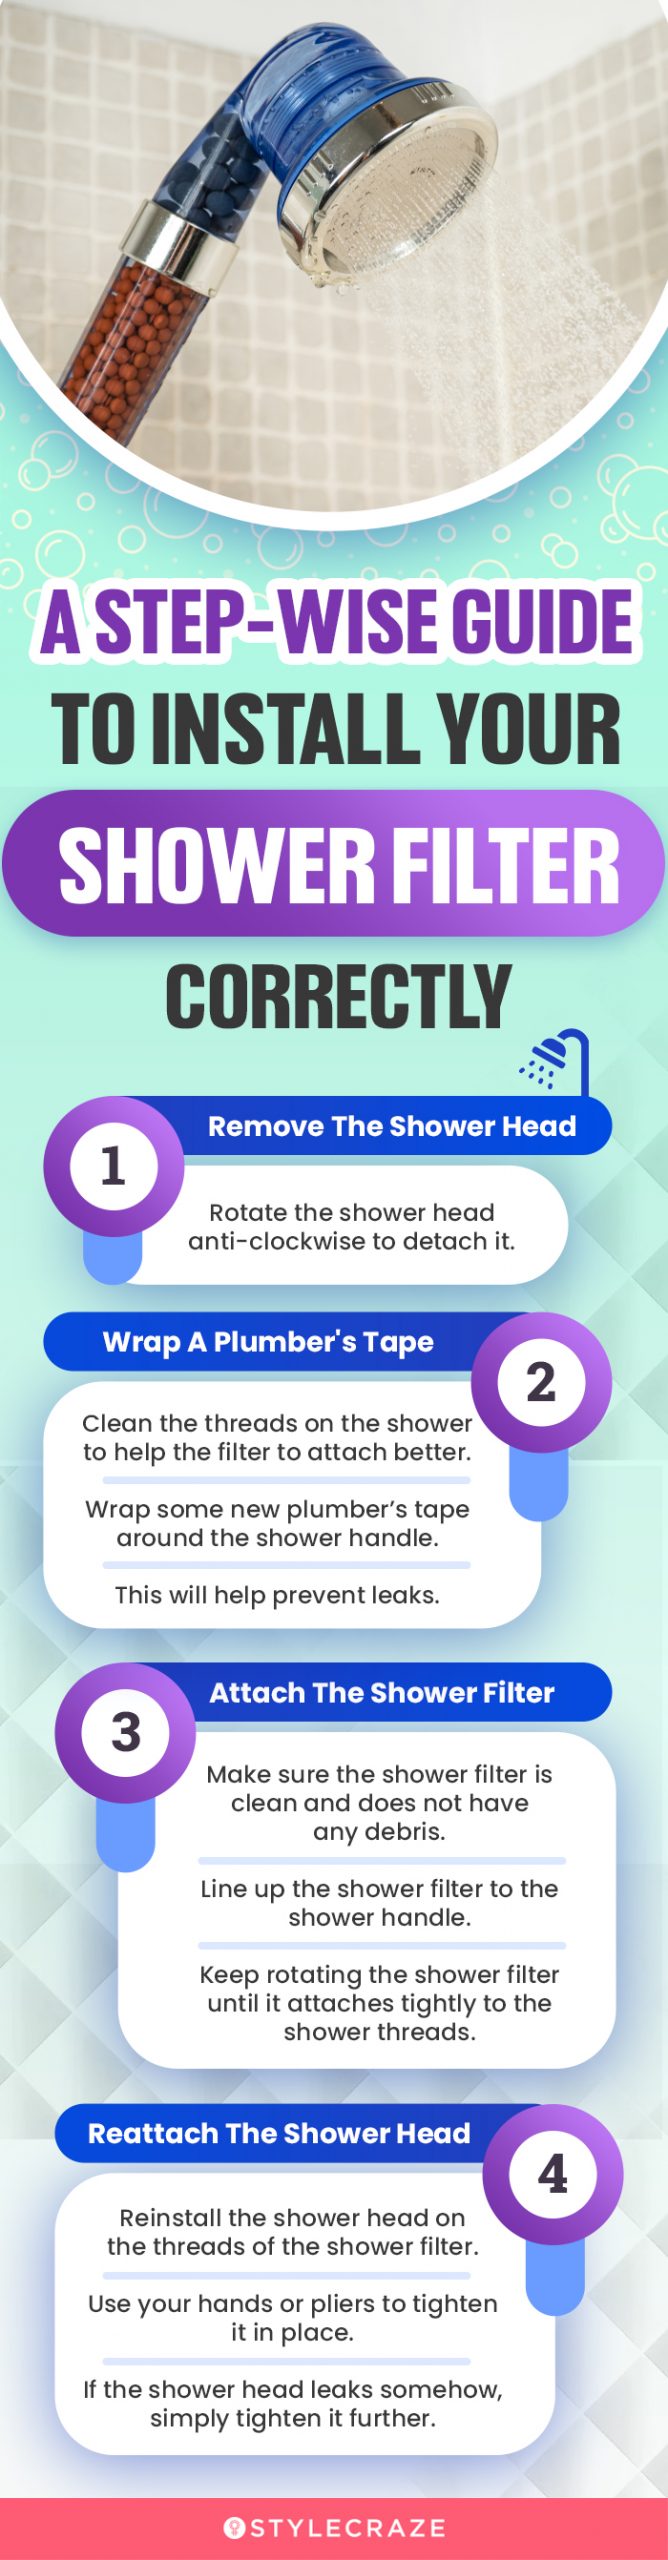 A Step Wise Guide To Install Your Shower Filter Correctly (infographic)